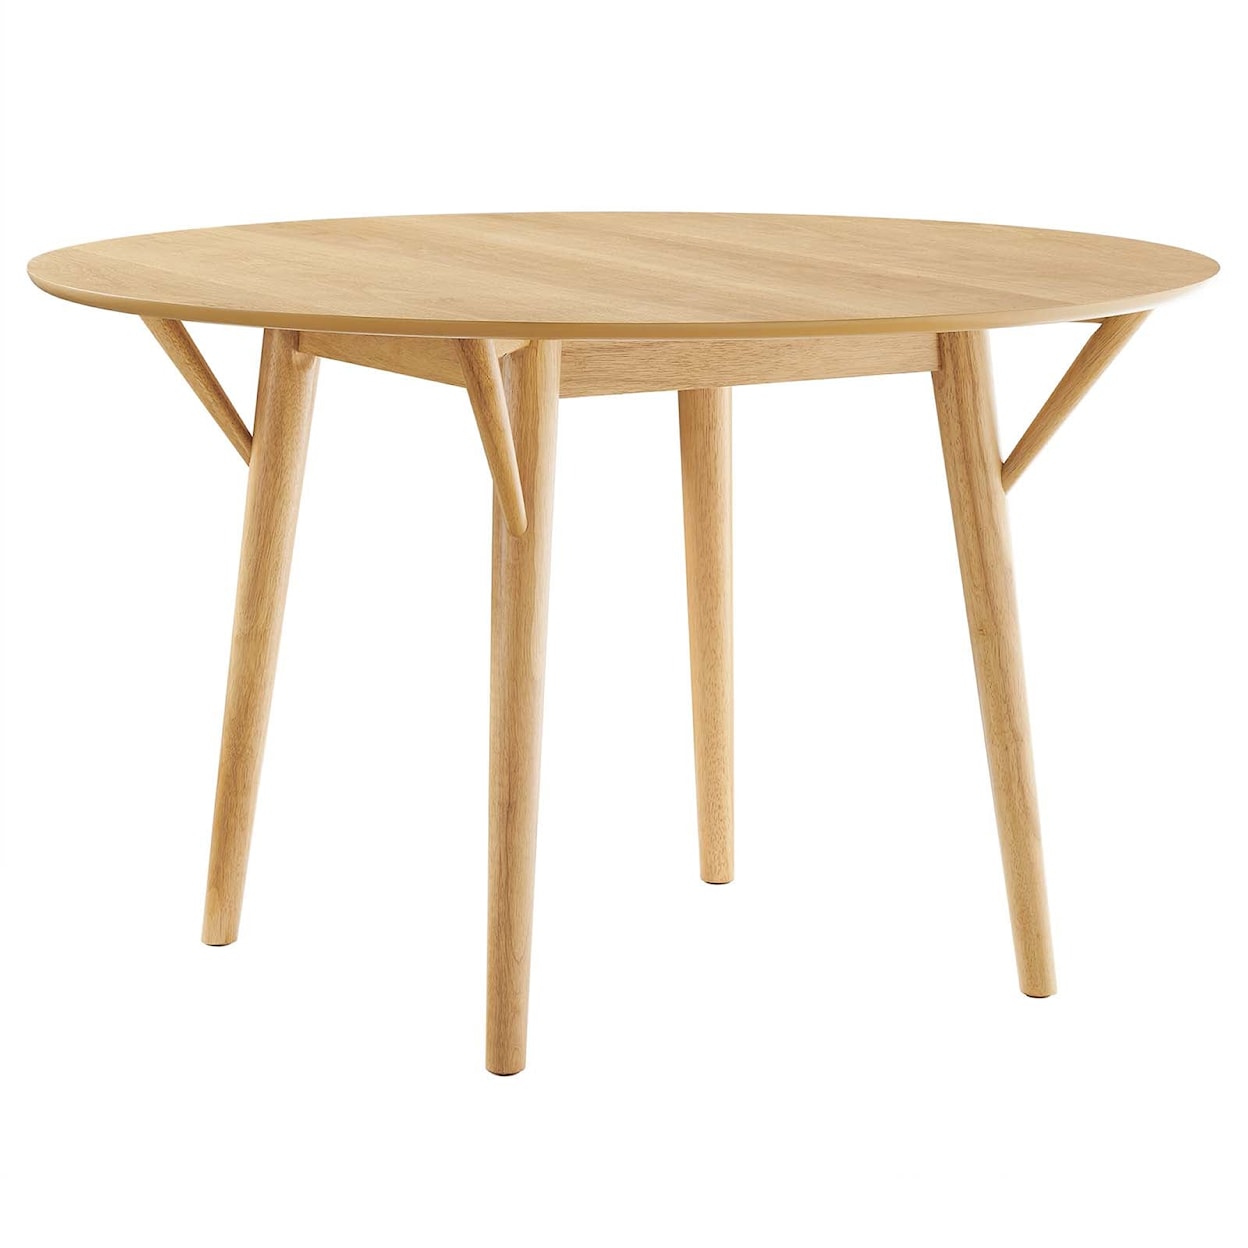 Modway Gallant Dining Table